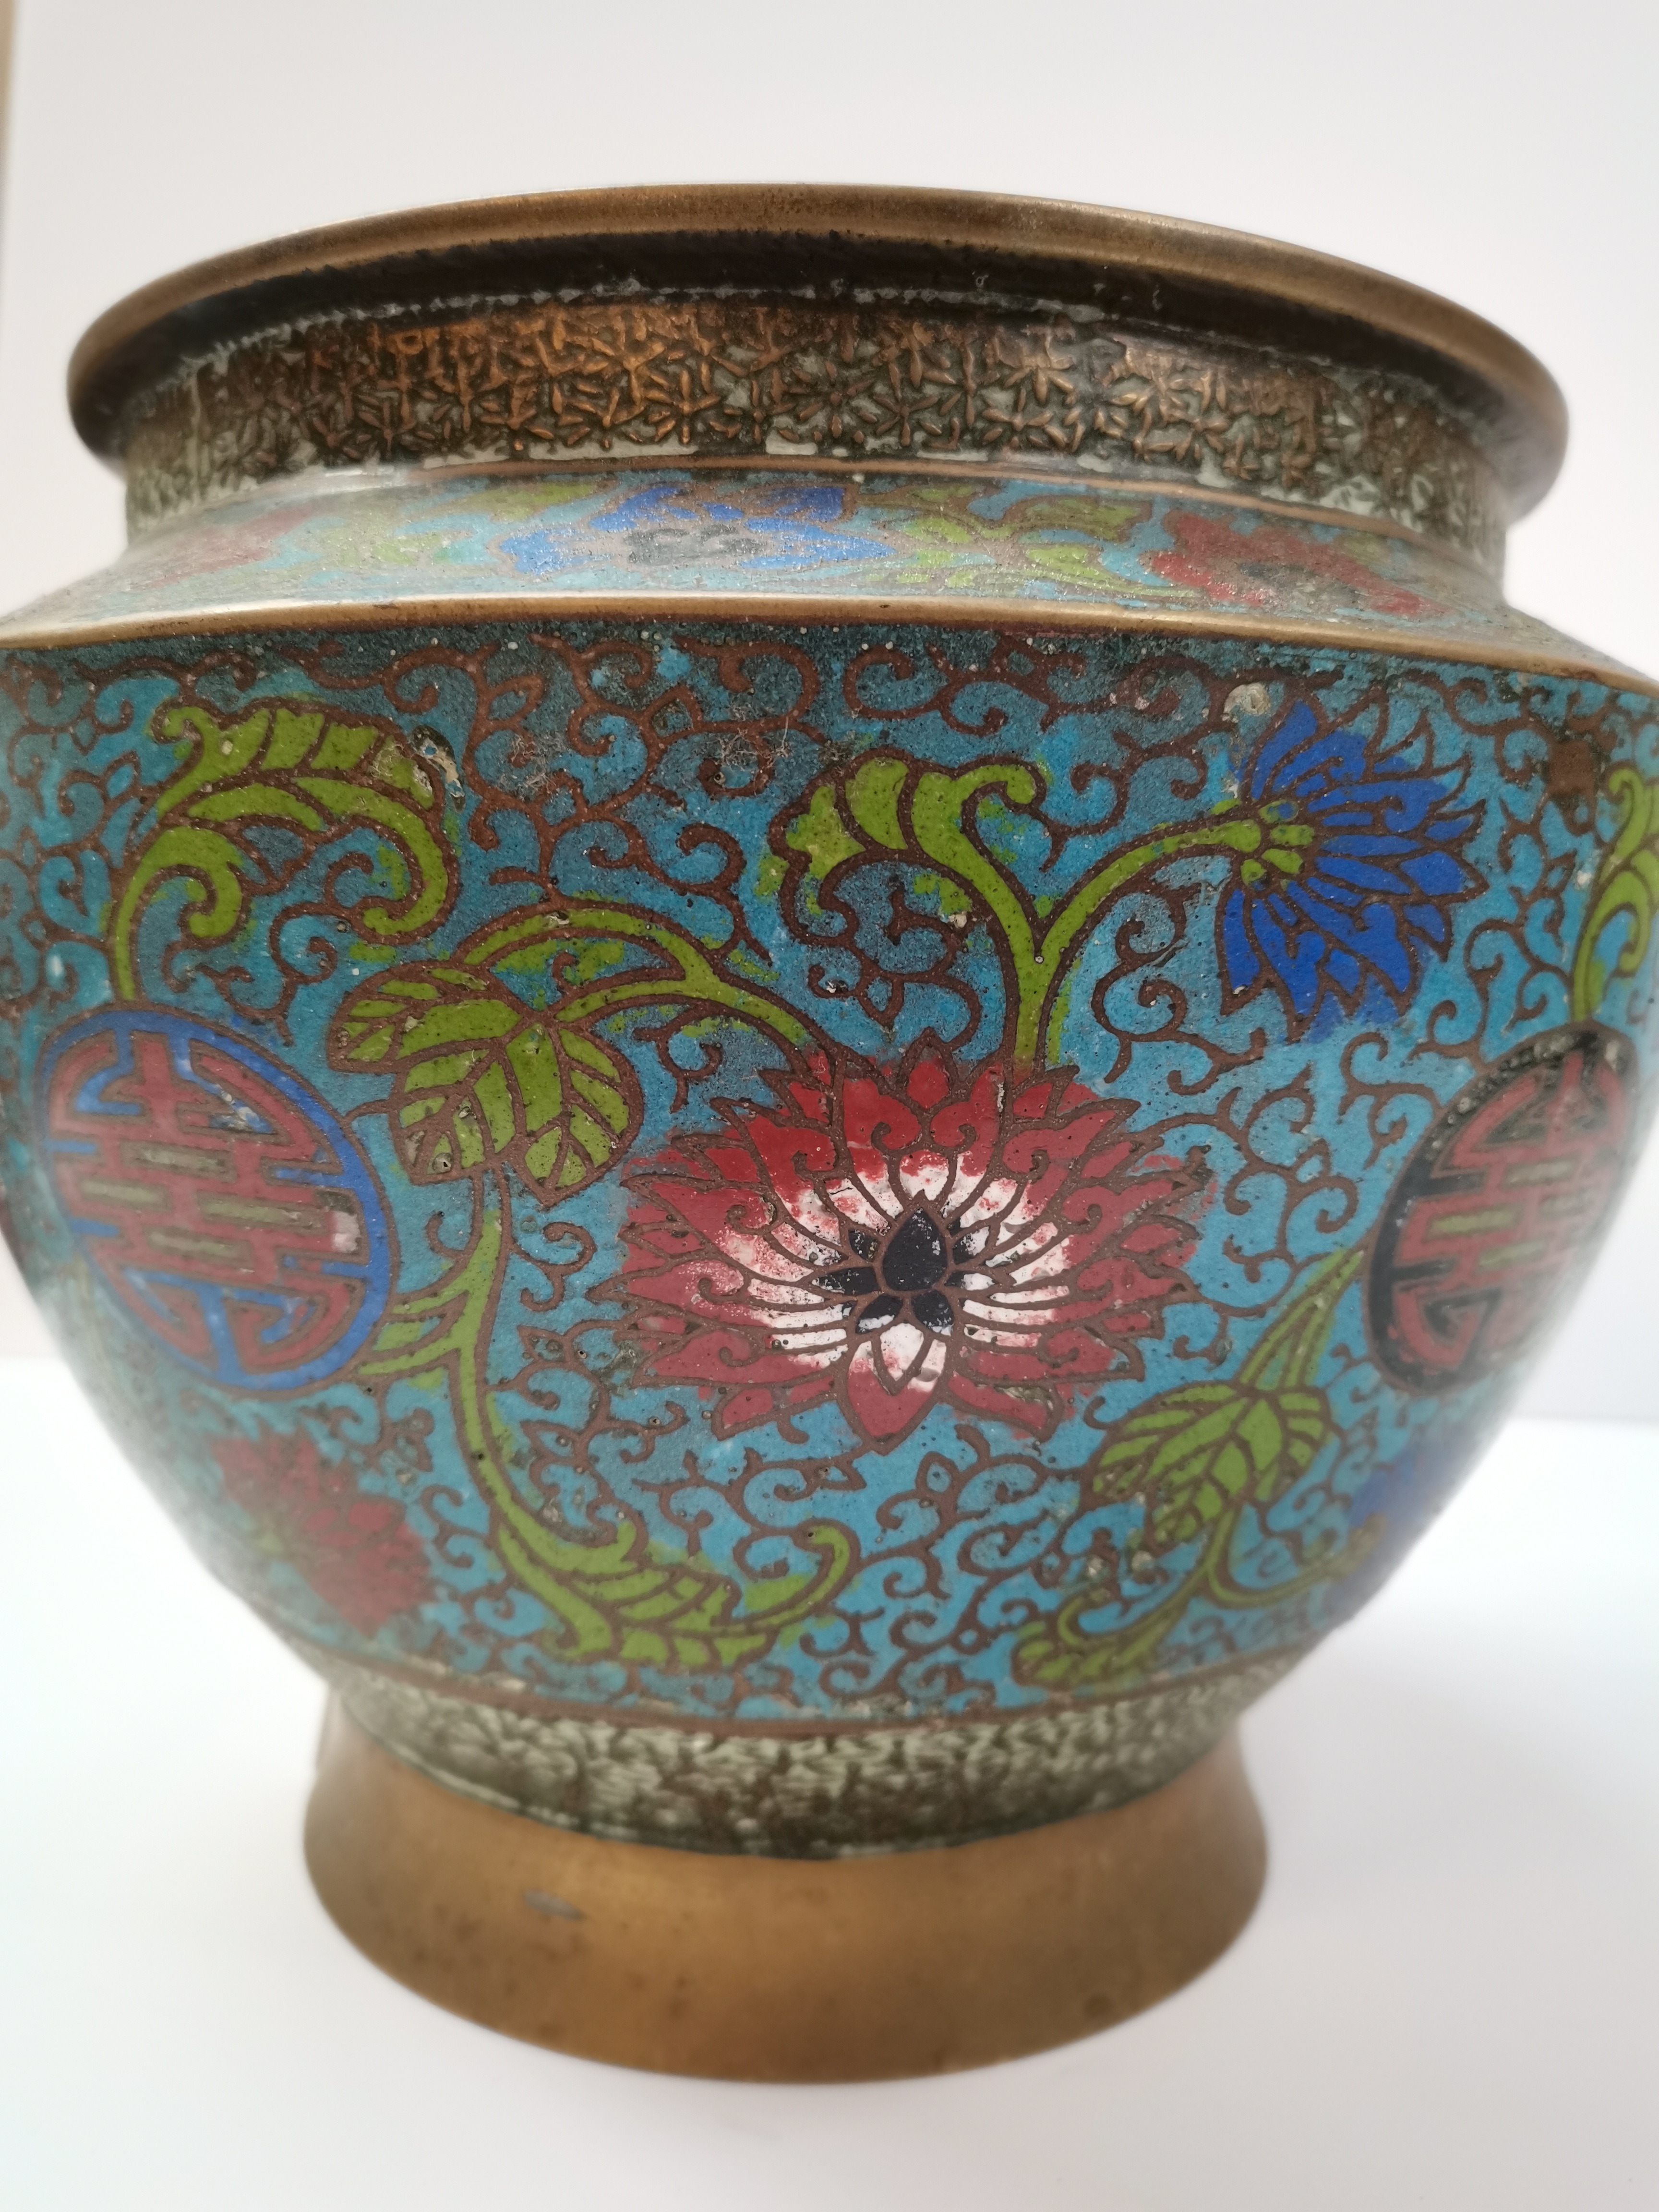 Cloisonne Green bowl D21cm H21cm good condition some signs of wear - Image 6 of 8